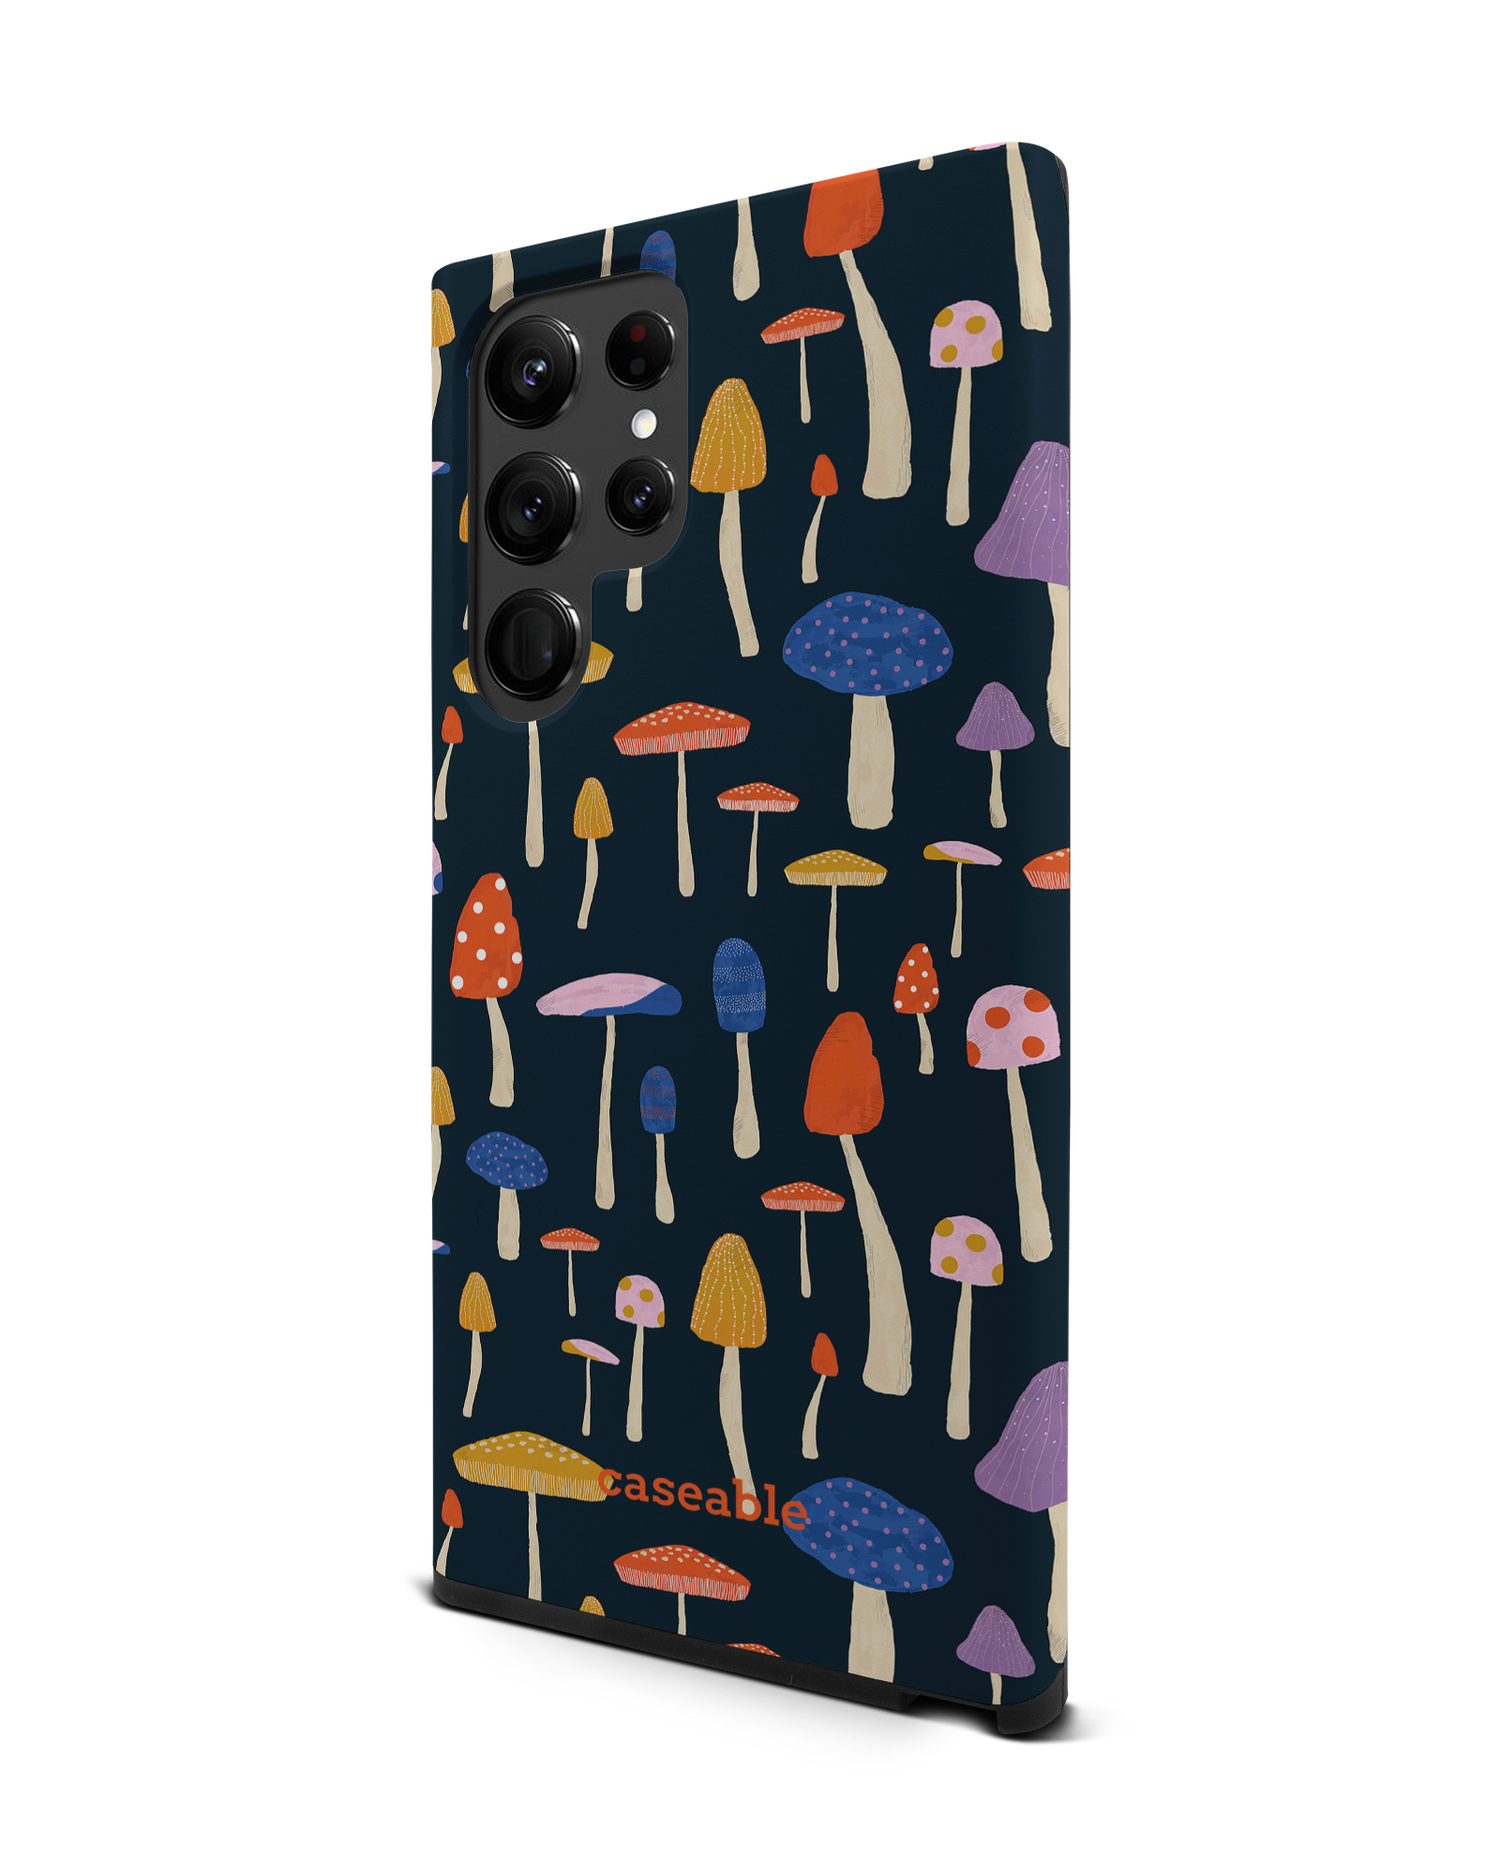 Mushroom Delights Premium Phone Case Samsung Galaxy S22 Ultra 5G: View from the right side